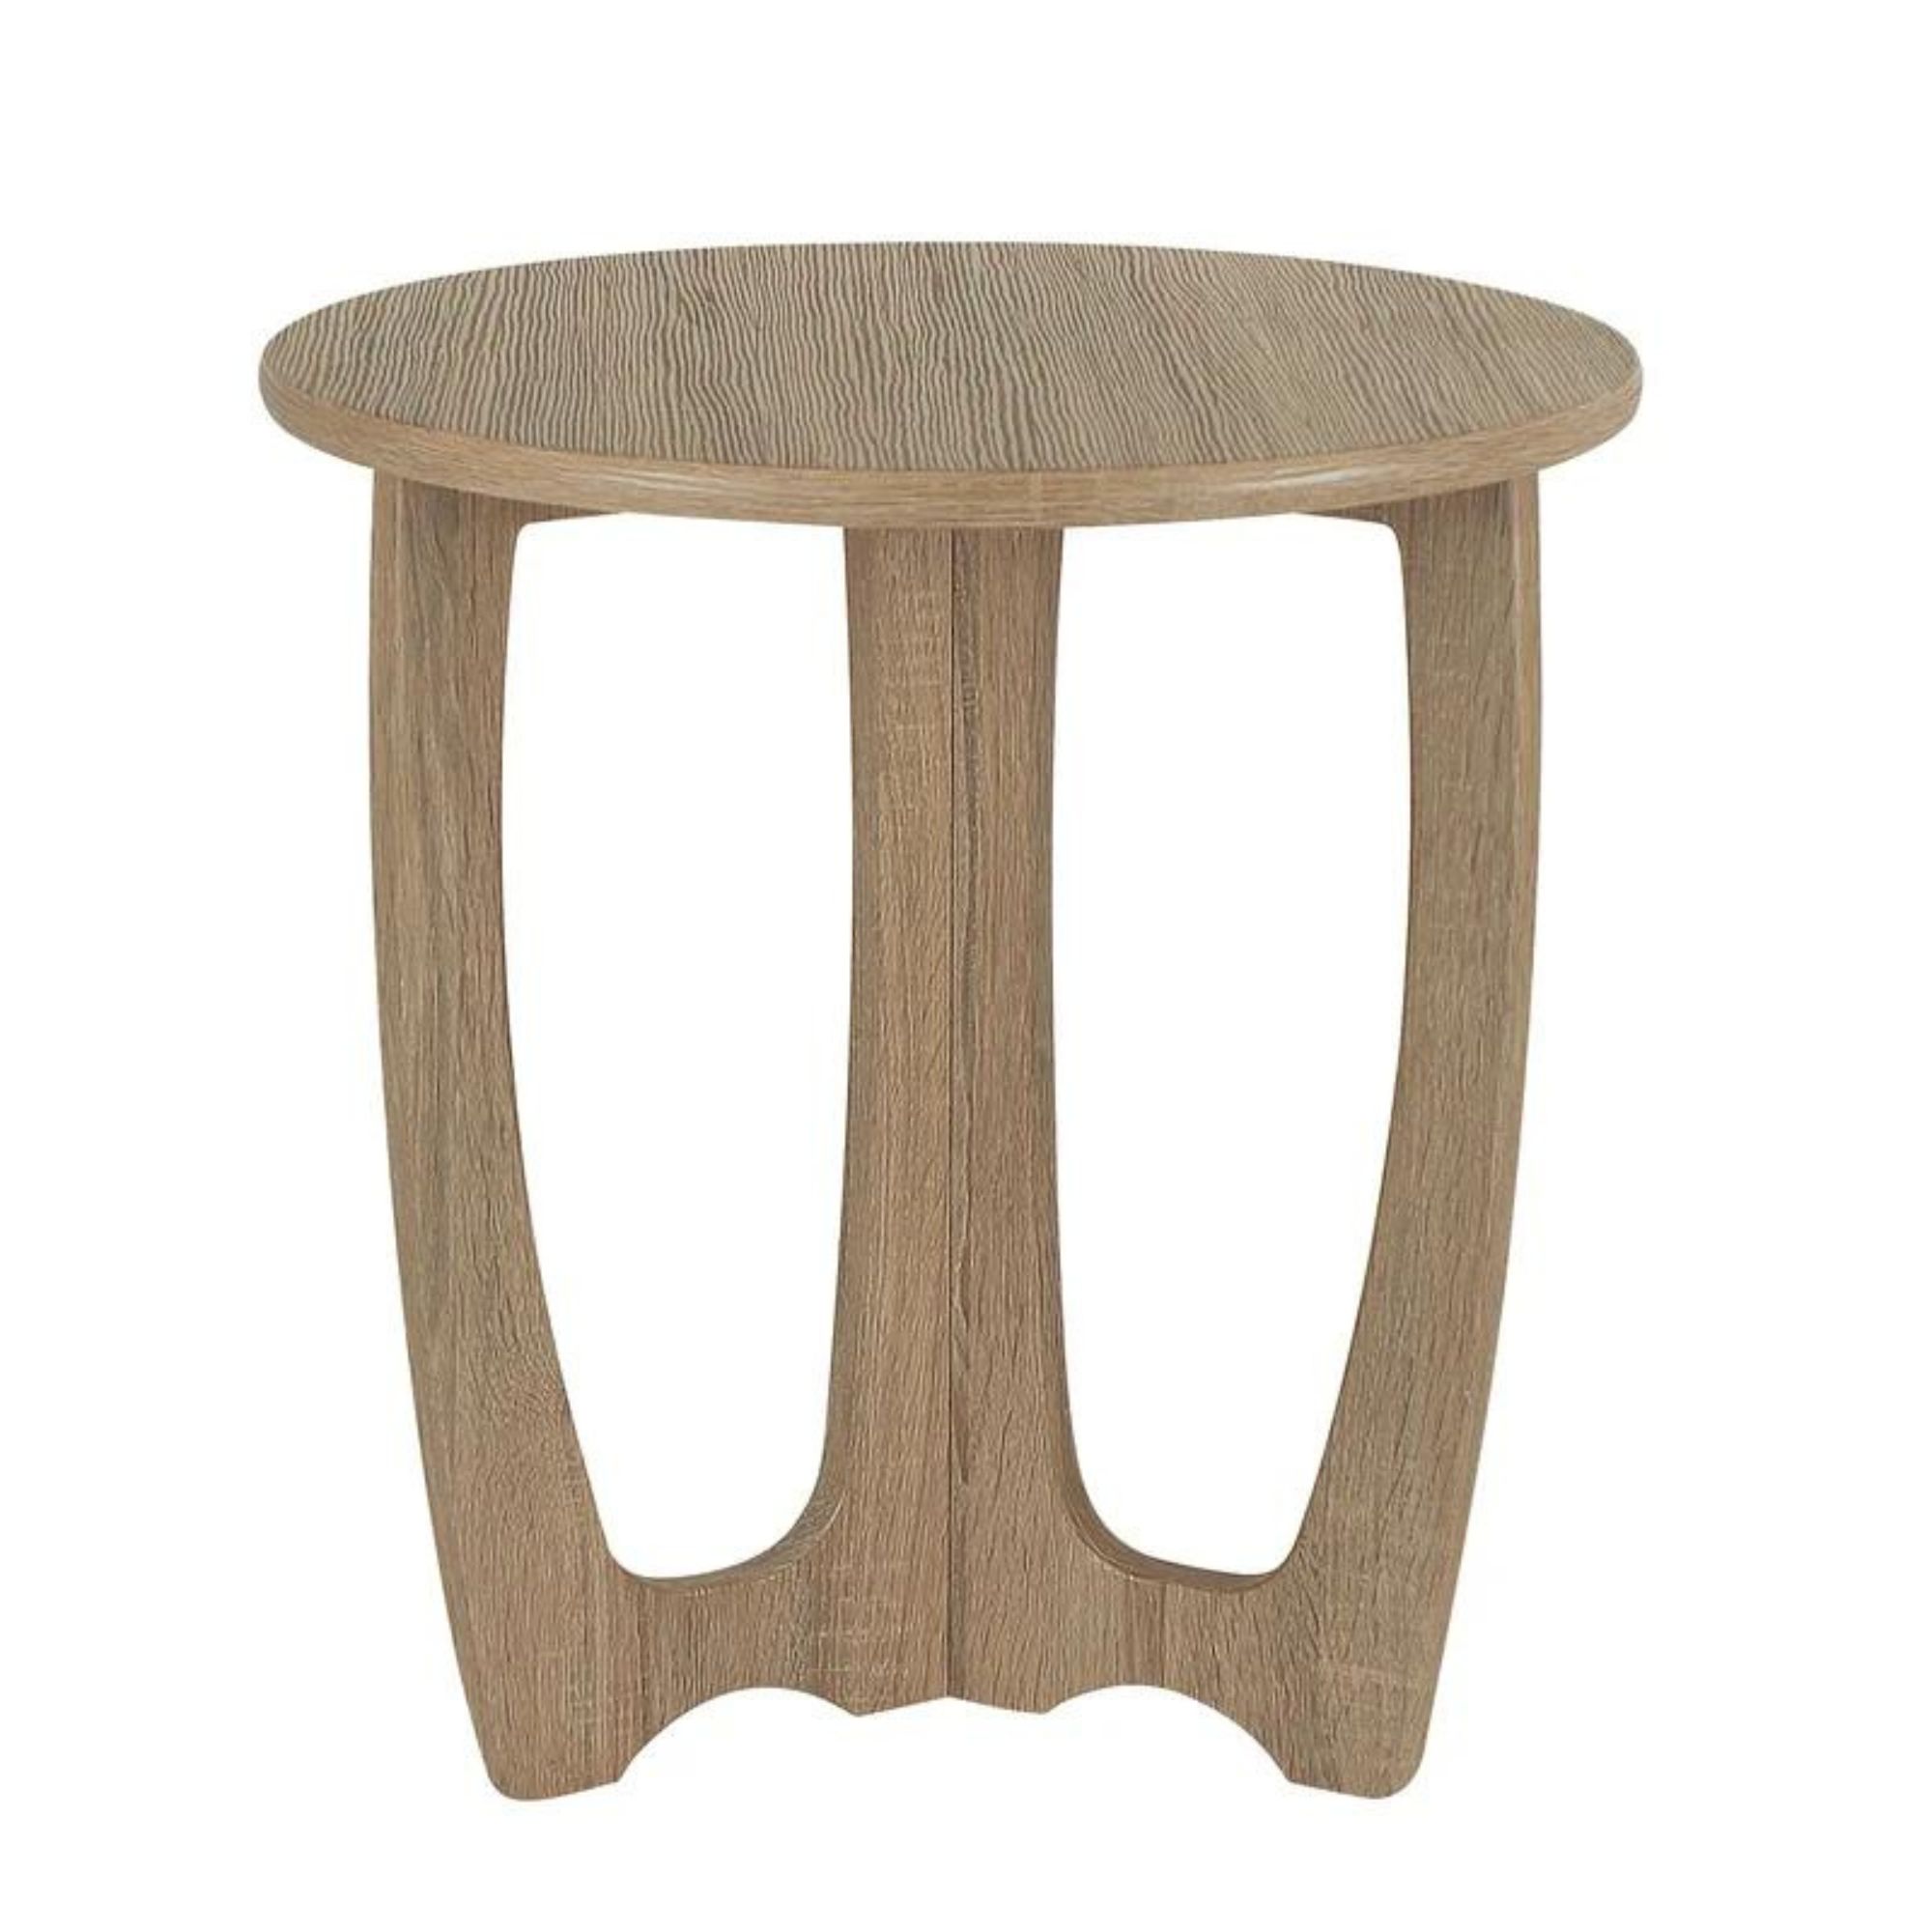 side table from wayfair kelly clarkson colelction